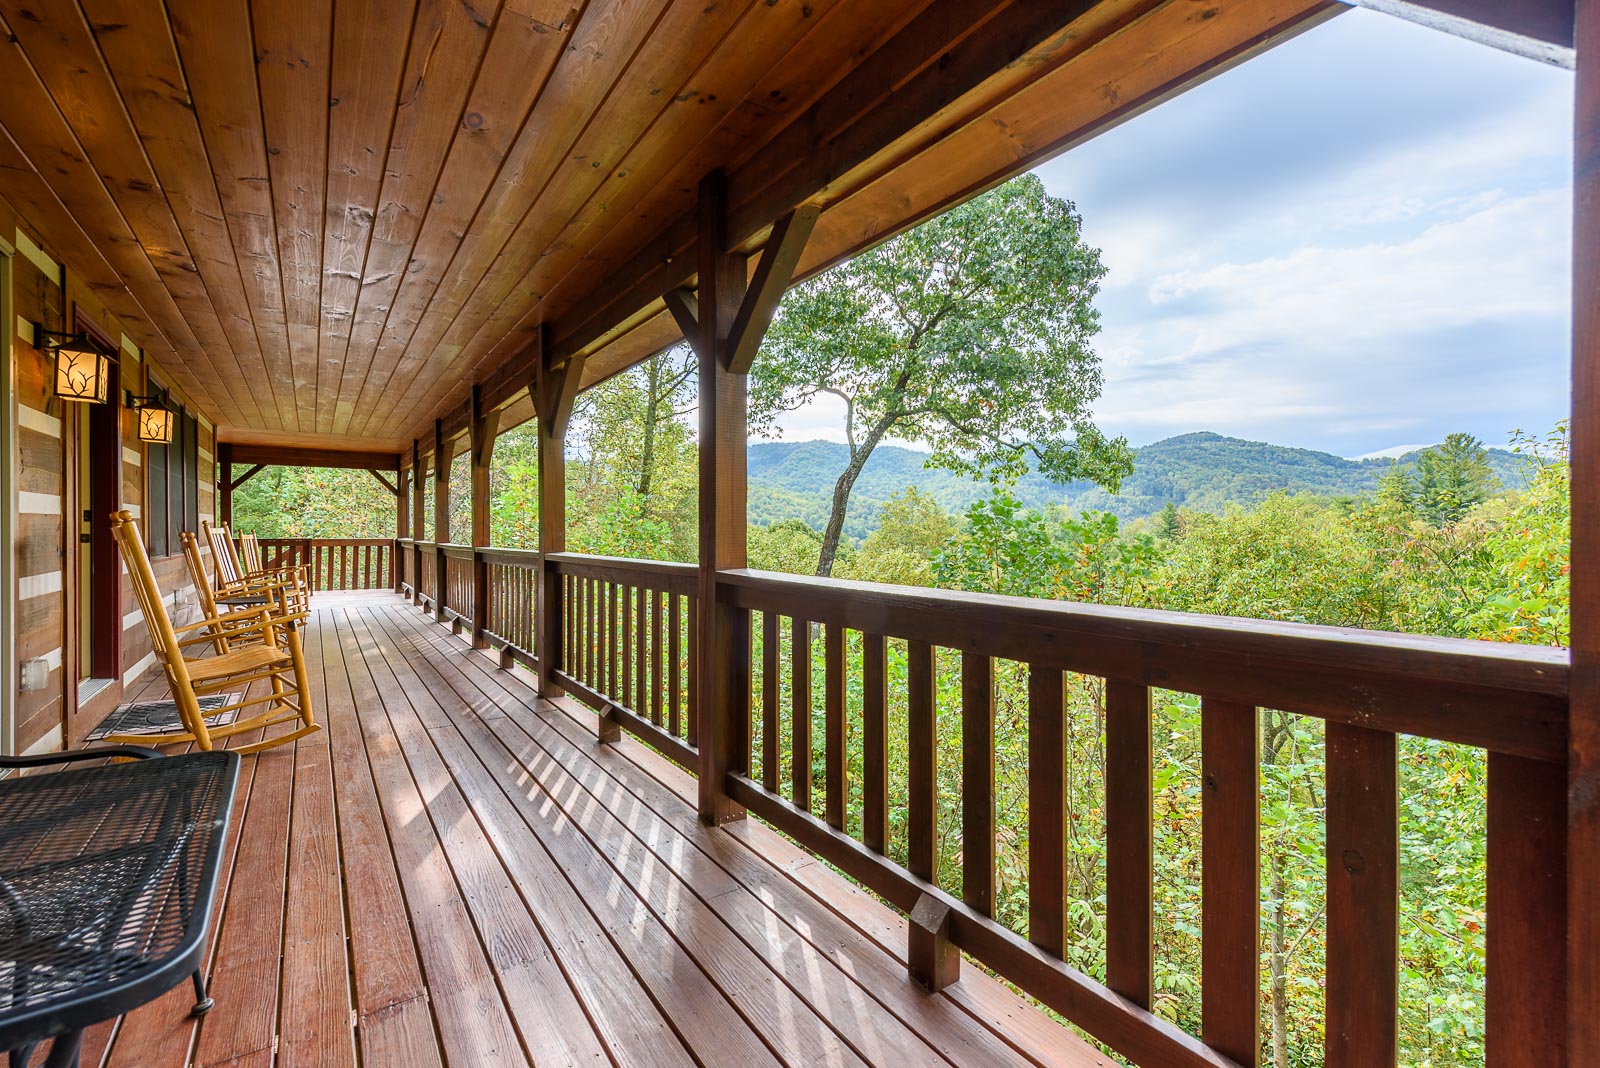 Beautiful Views and Lots of Seating on Covered Deck